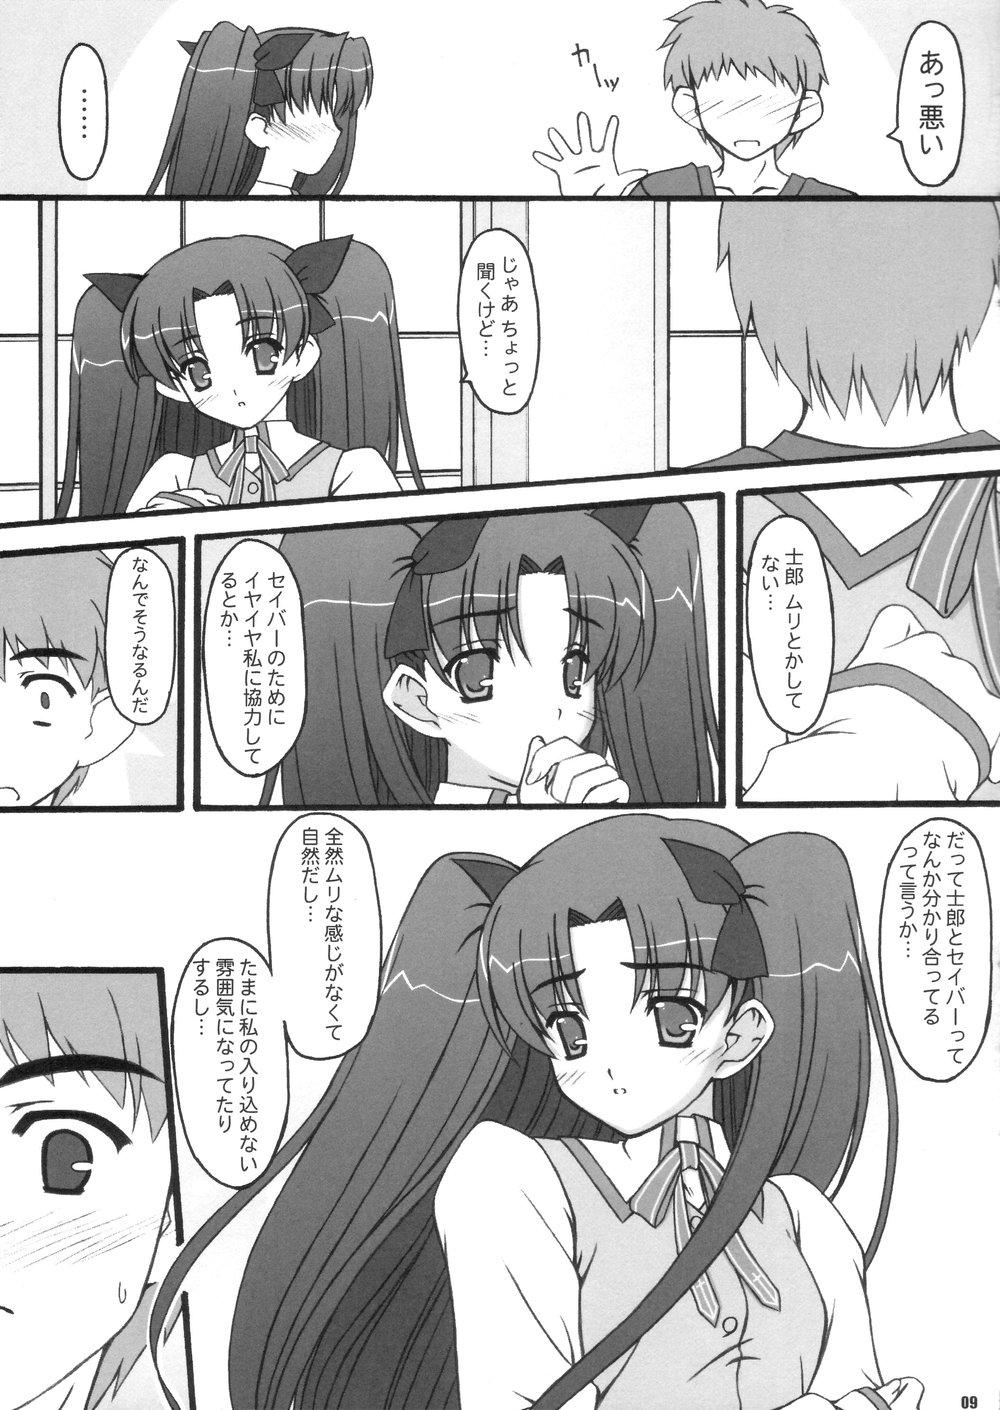 Casal Fight - Fate stay night Cutie - Page 8